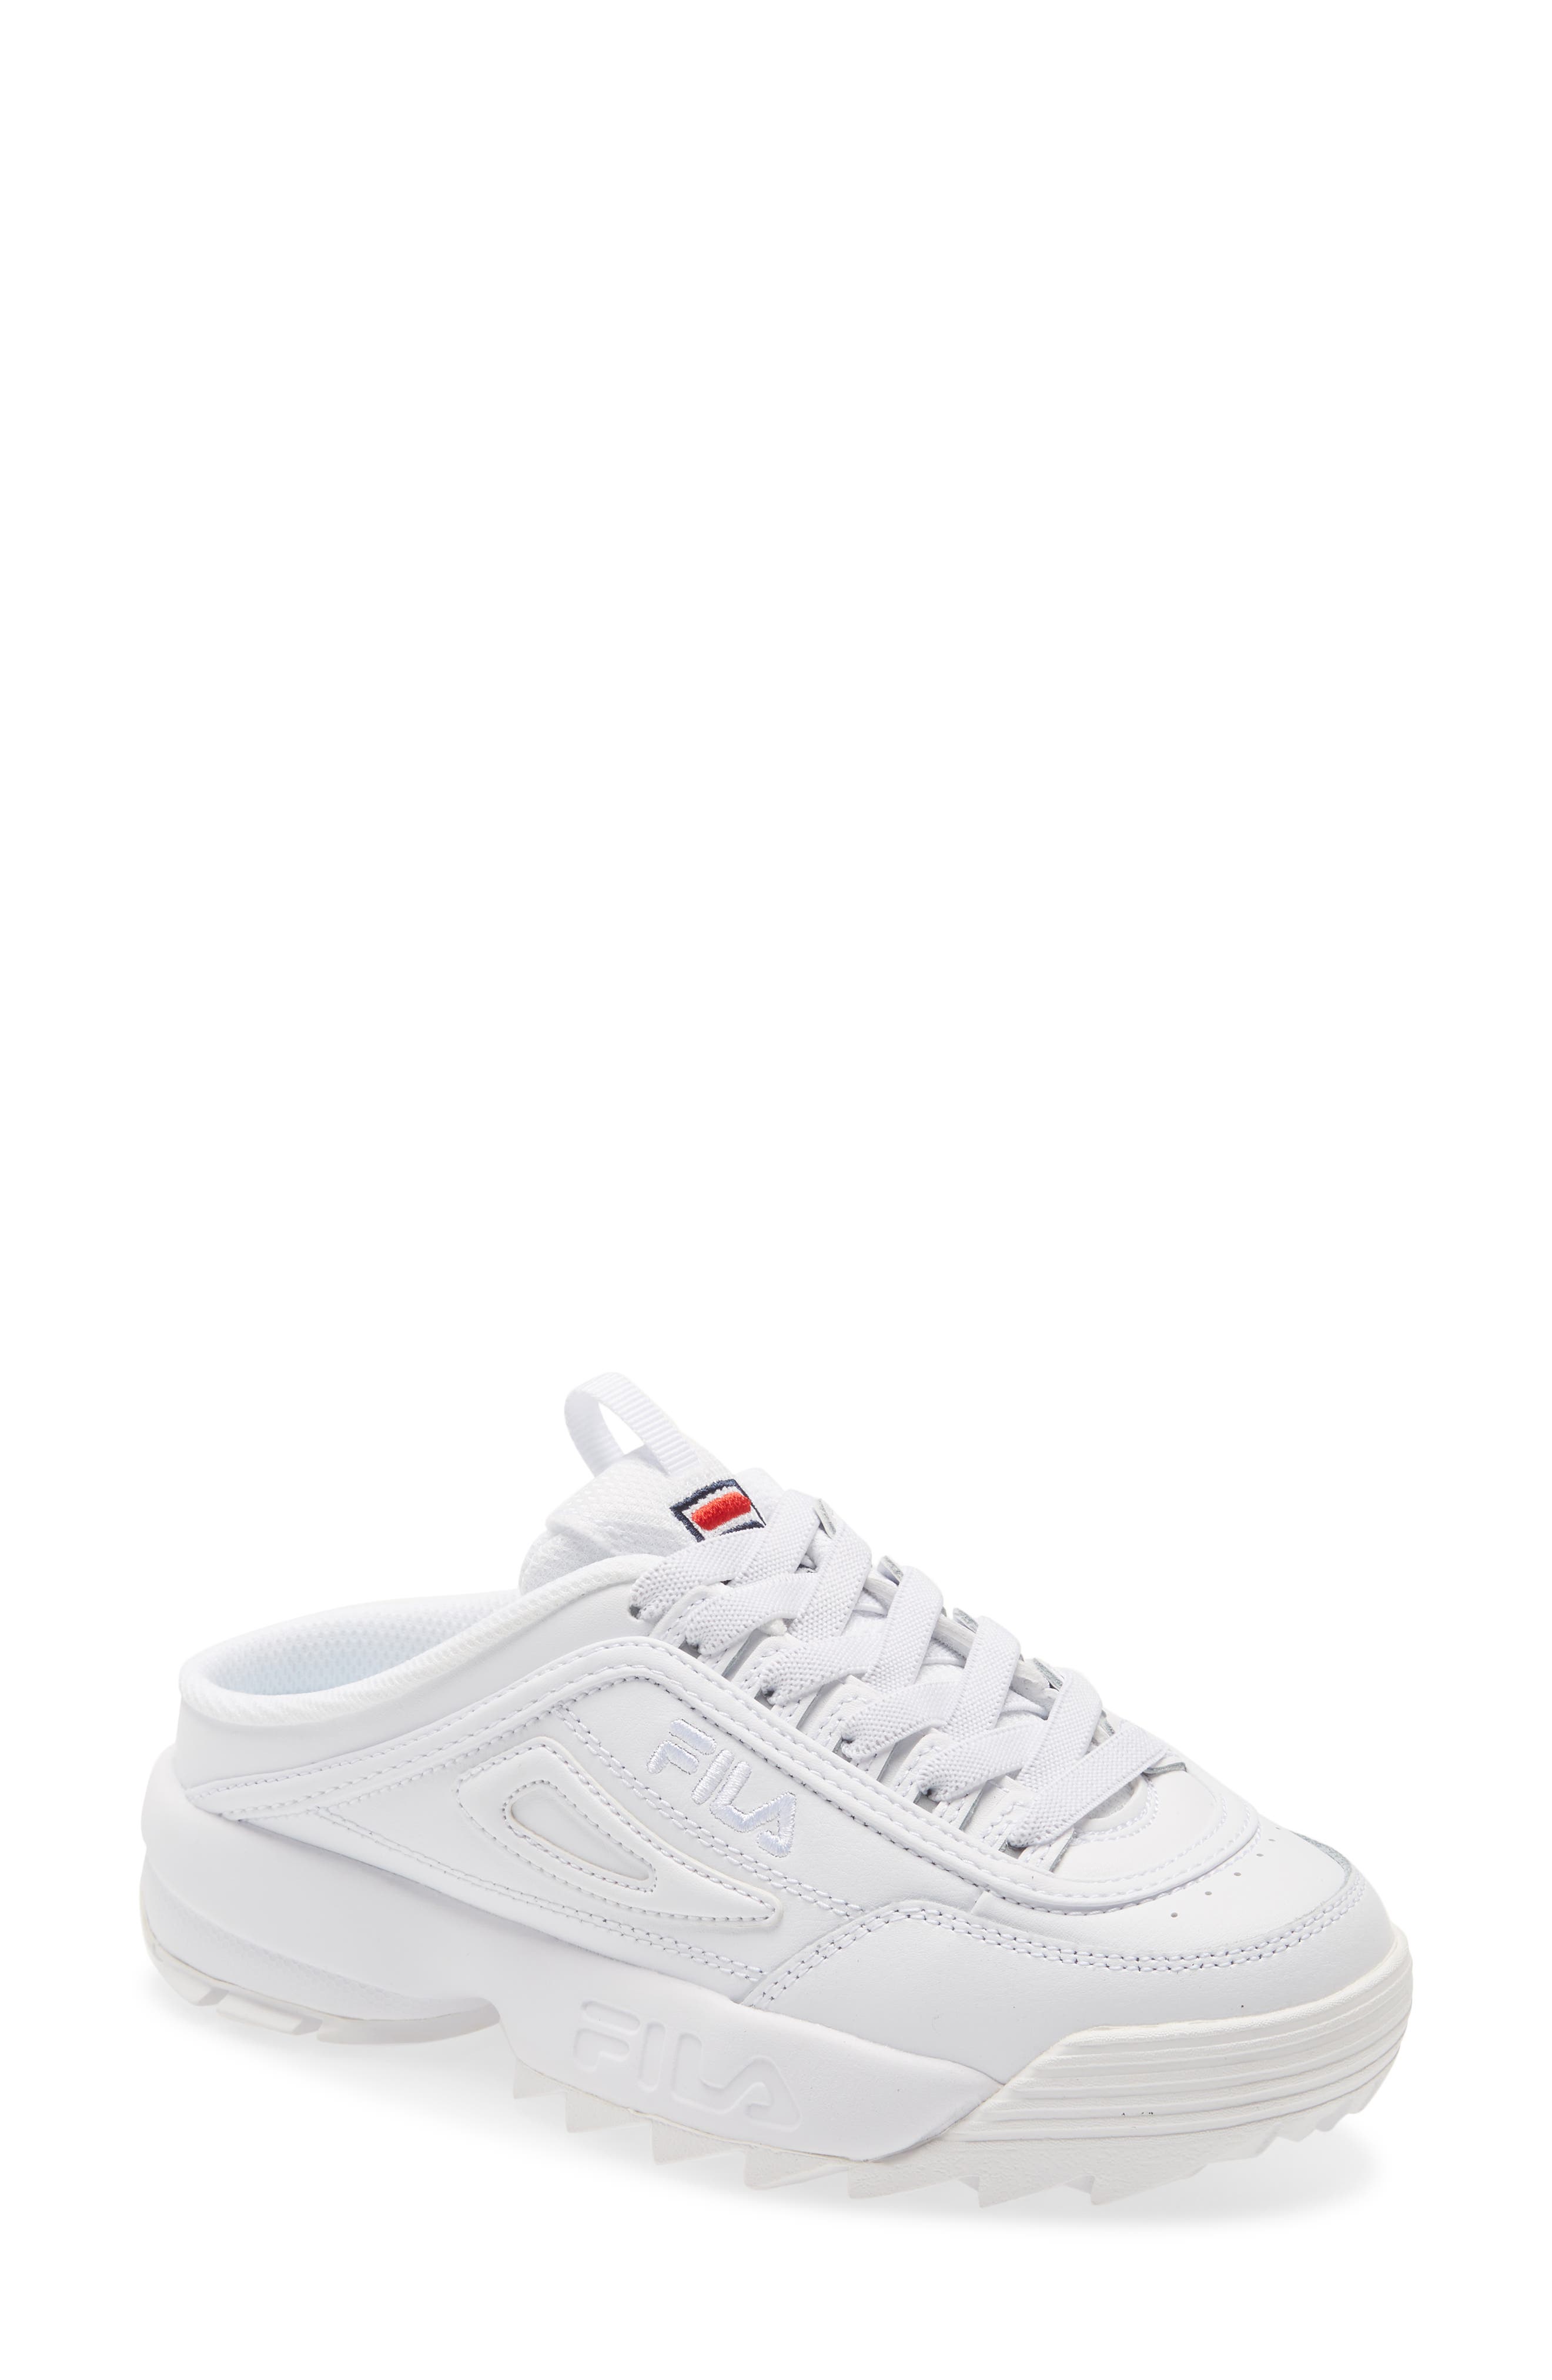 fila shoes womens nordstrom